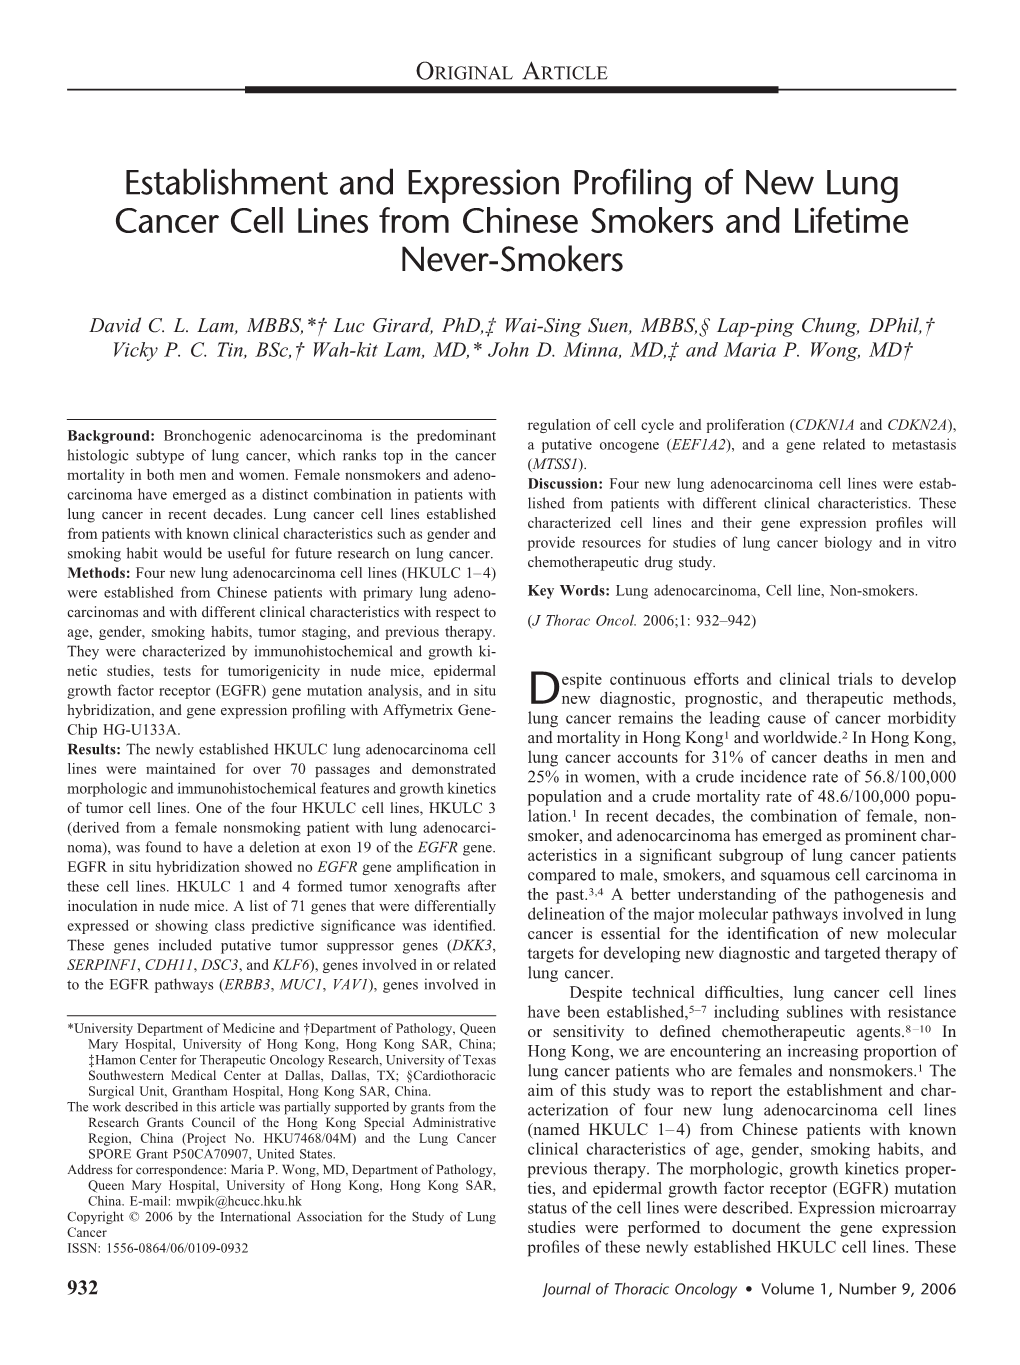 Establishment and Expression Profiling of New Lung Cancer Cell Lines from Chinese Smokers and Lifetime Never-Smokers